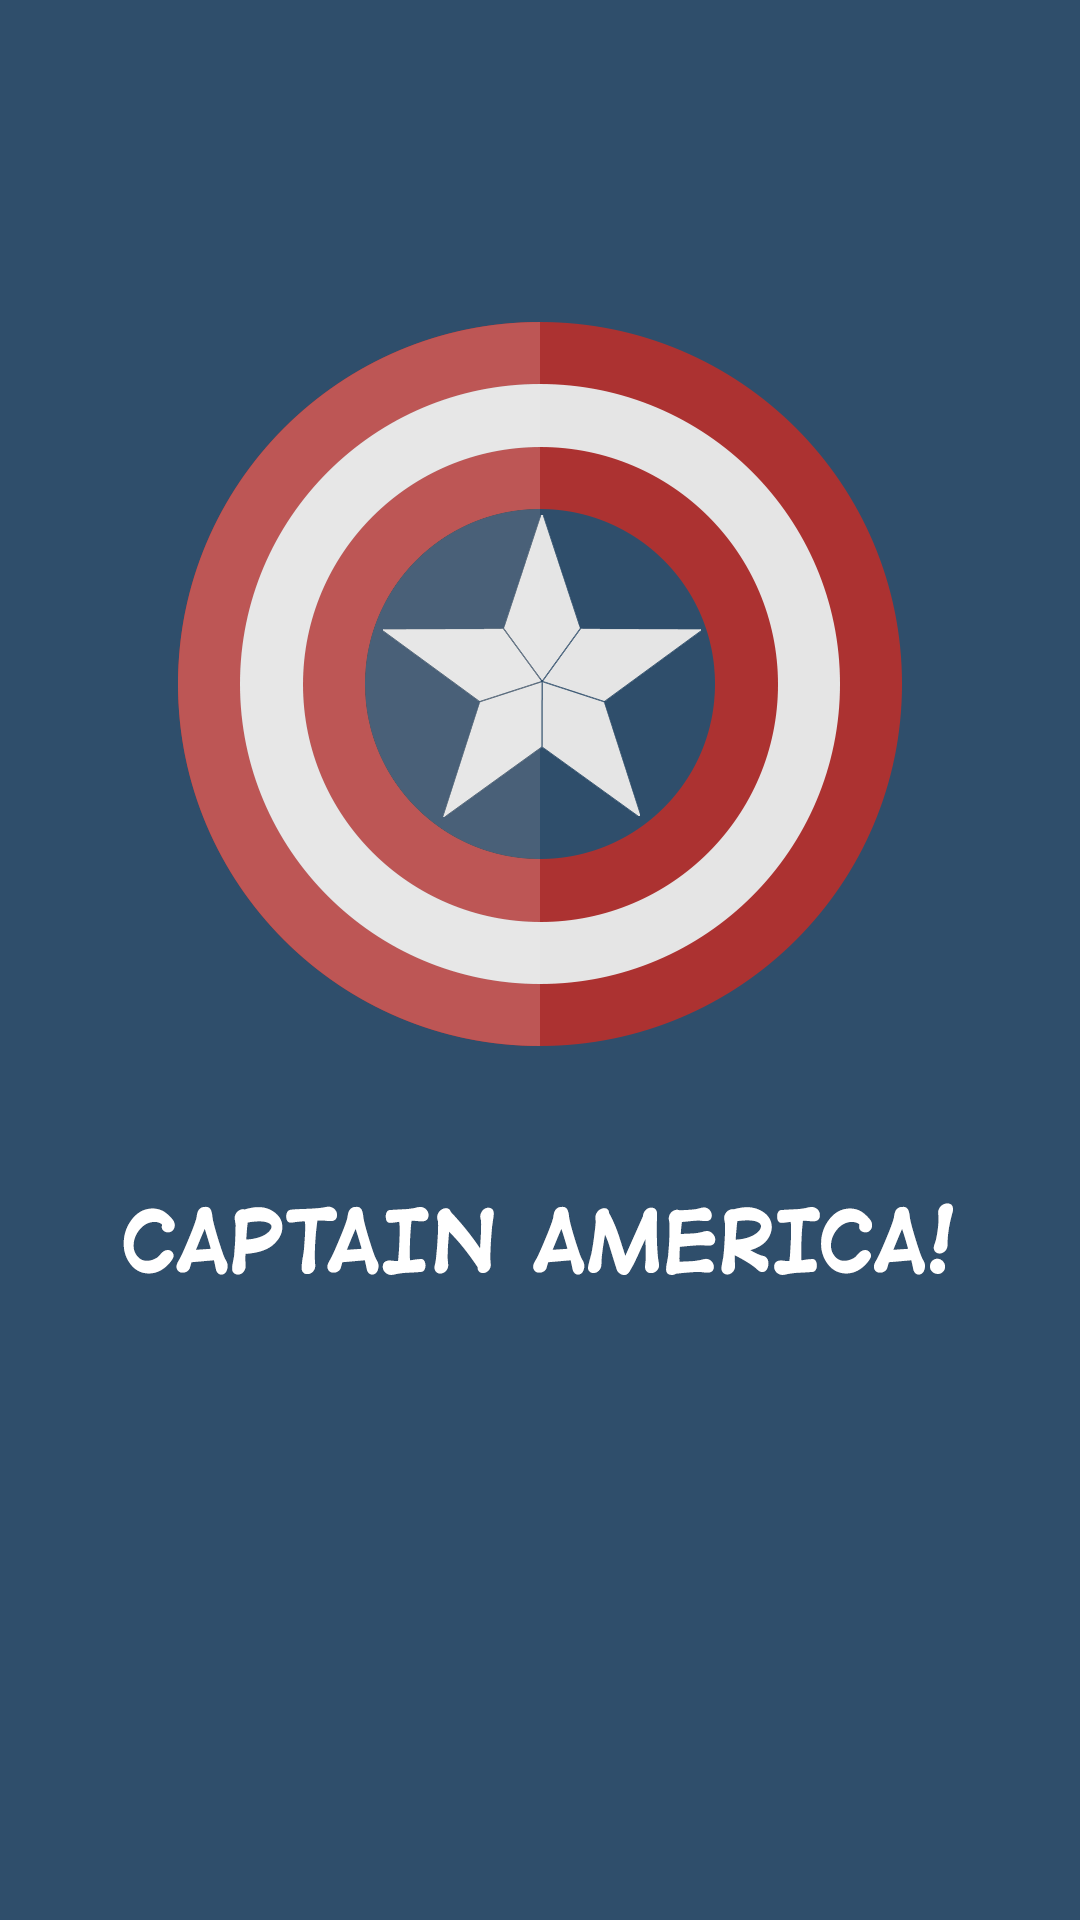 Here's a version of the Captain America mobile wallpaper I